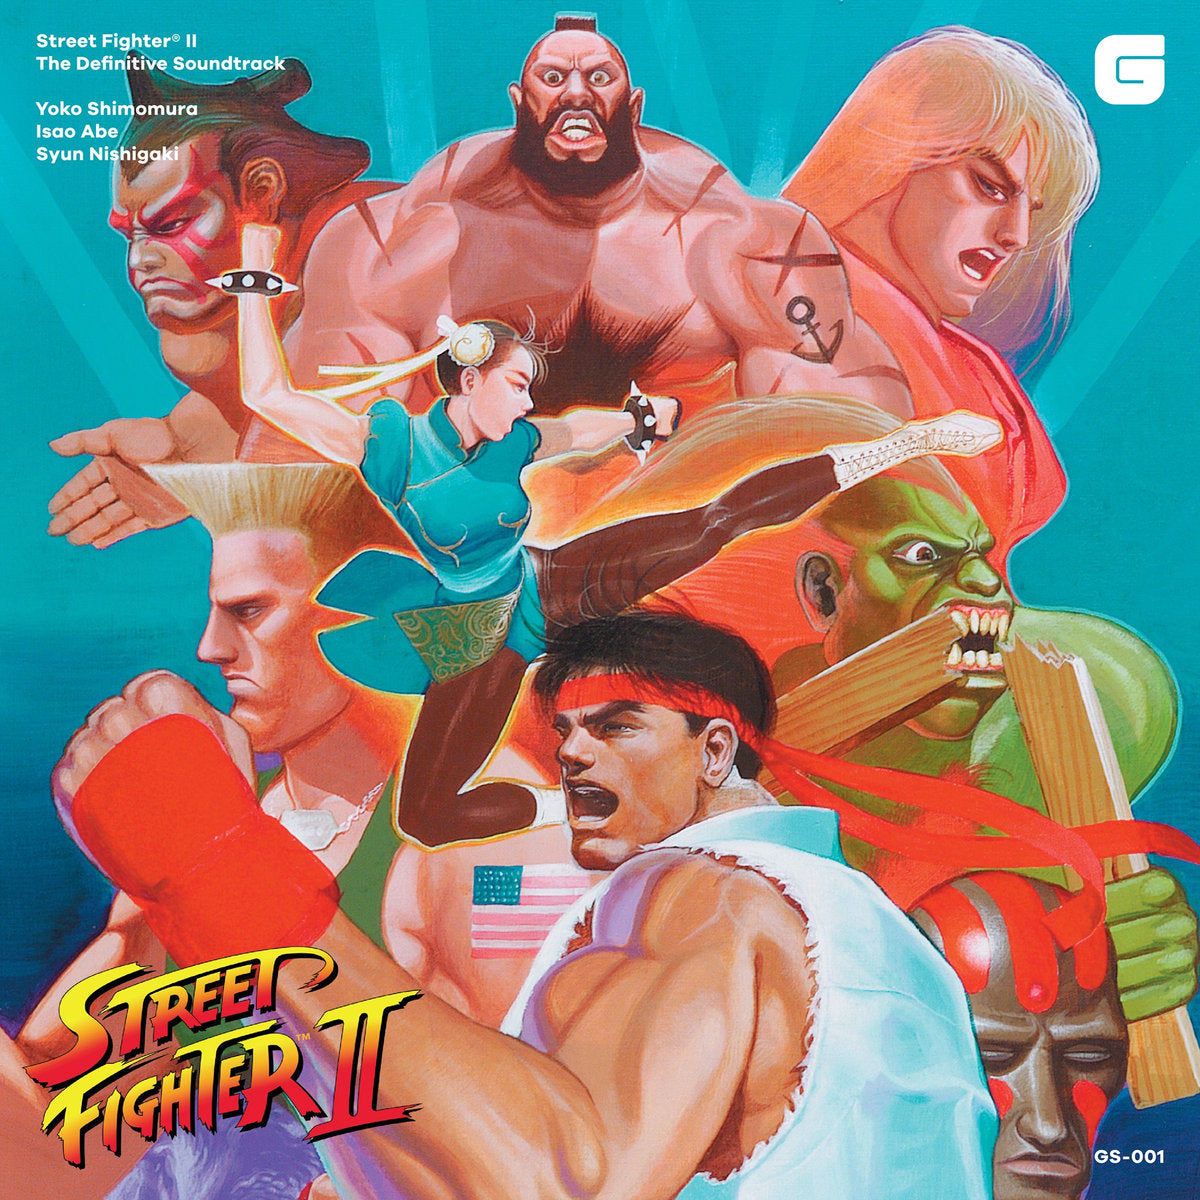 Street Fighter II The Definitive Soundtrack - CD